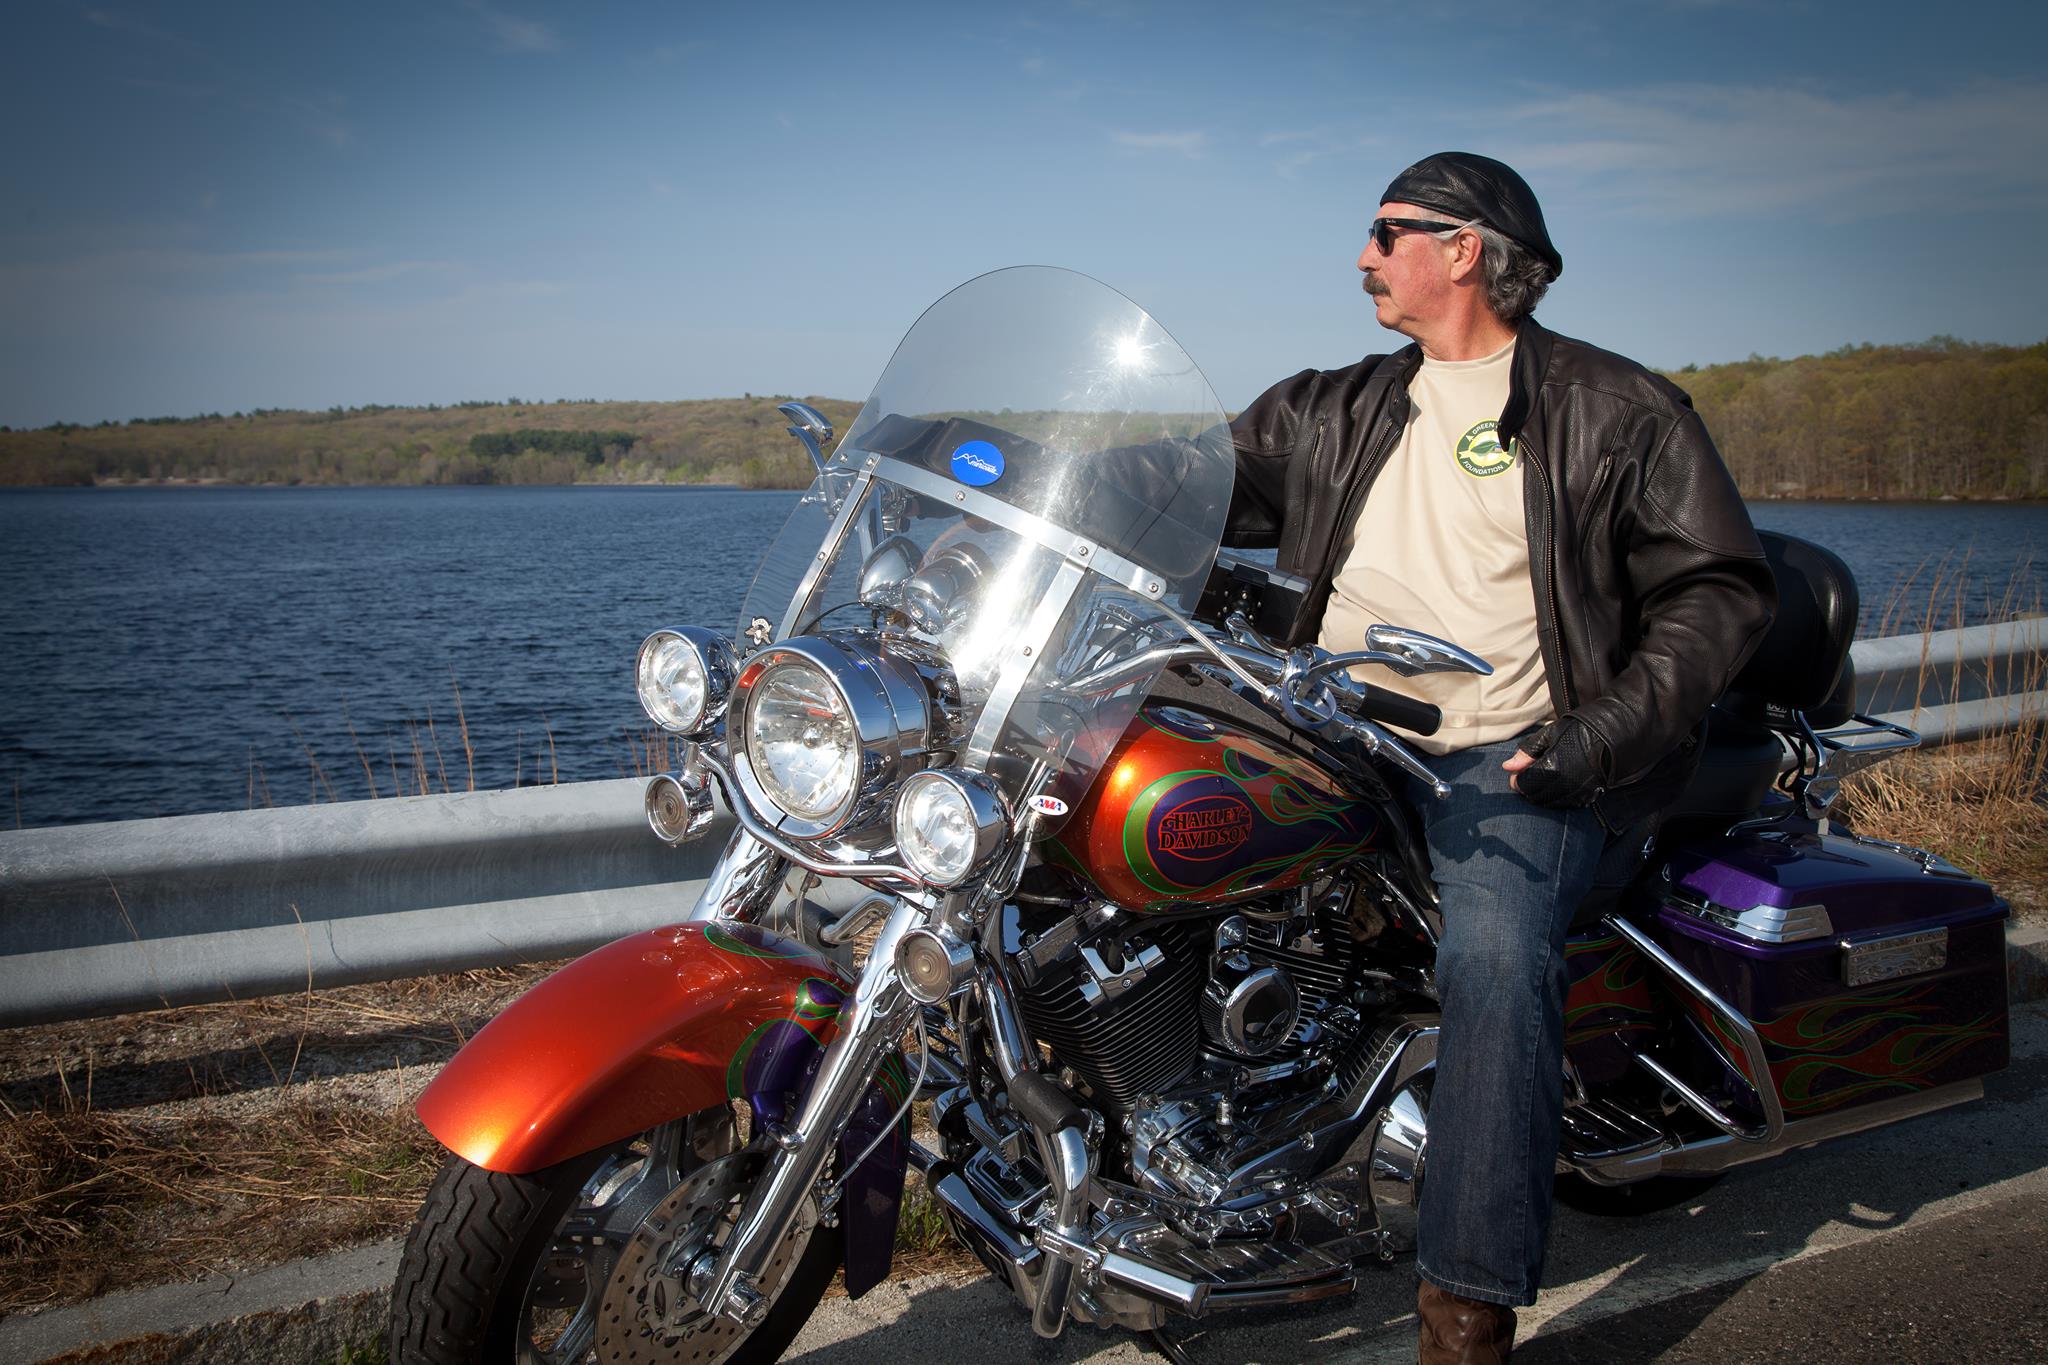 Chuck Furey started June 9, 2015 and will be stopping in Sturgis for the 75th Sturgis Rally for a benefit dinner and concert with Def Leppard where he is raising money for five foundations.